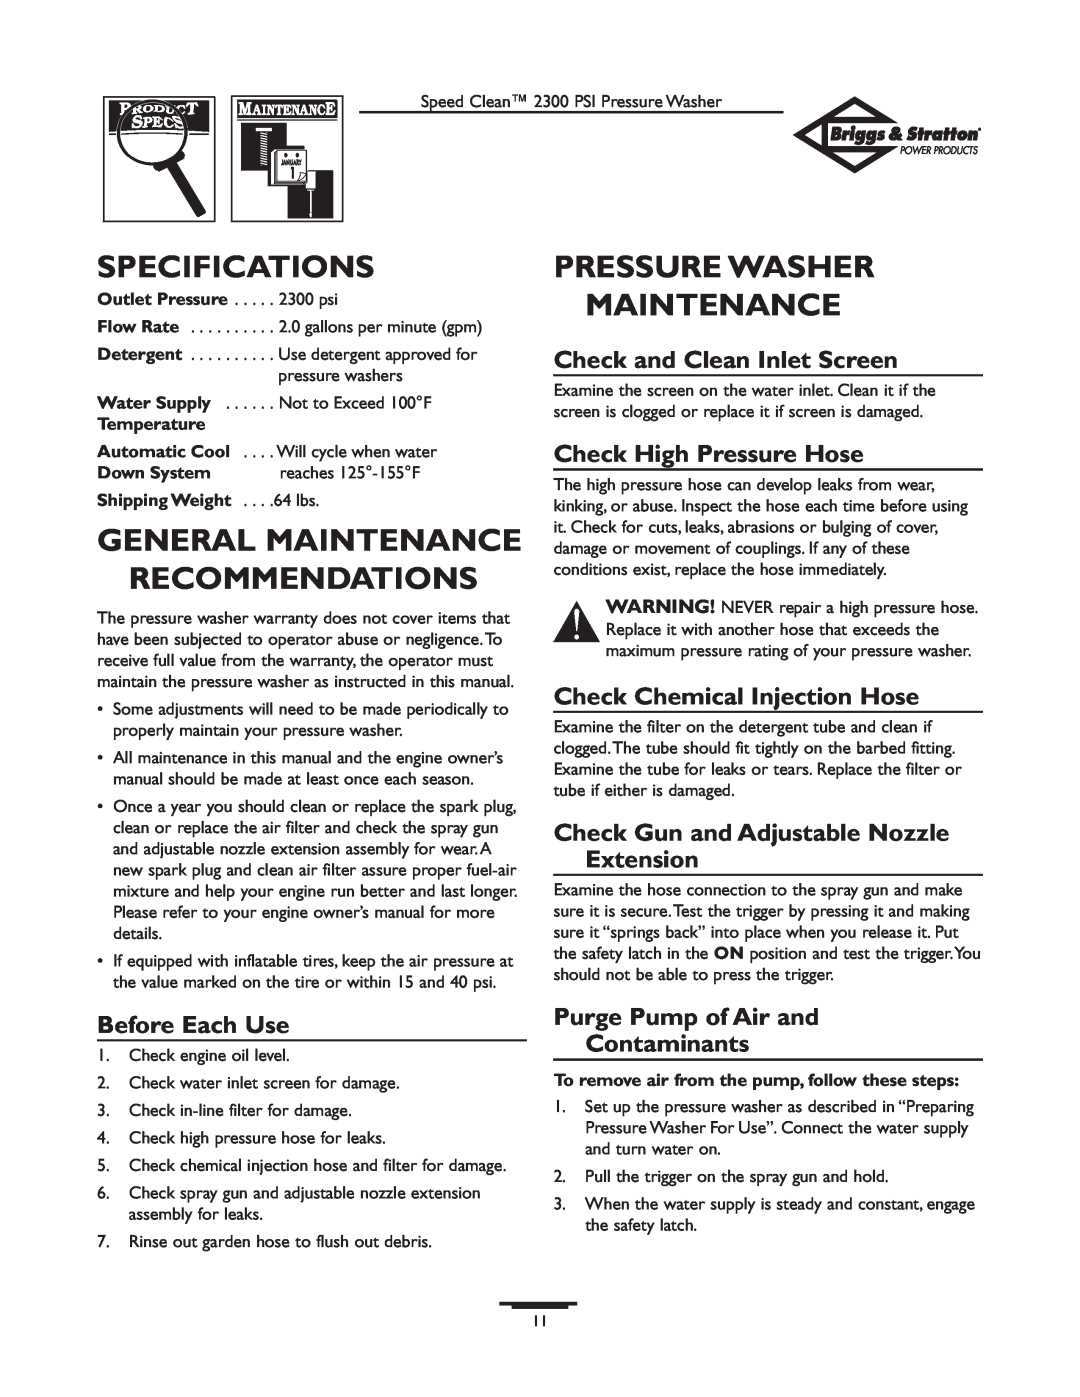 Briggs & Stratton 1909-0 Specifications, General Maintenance Recommendations, Pressure Washer Maintenance, Before Each Use 